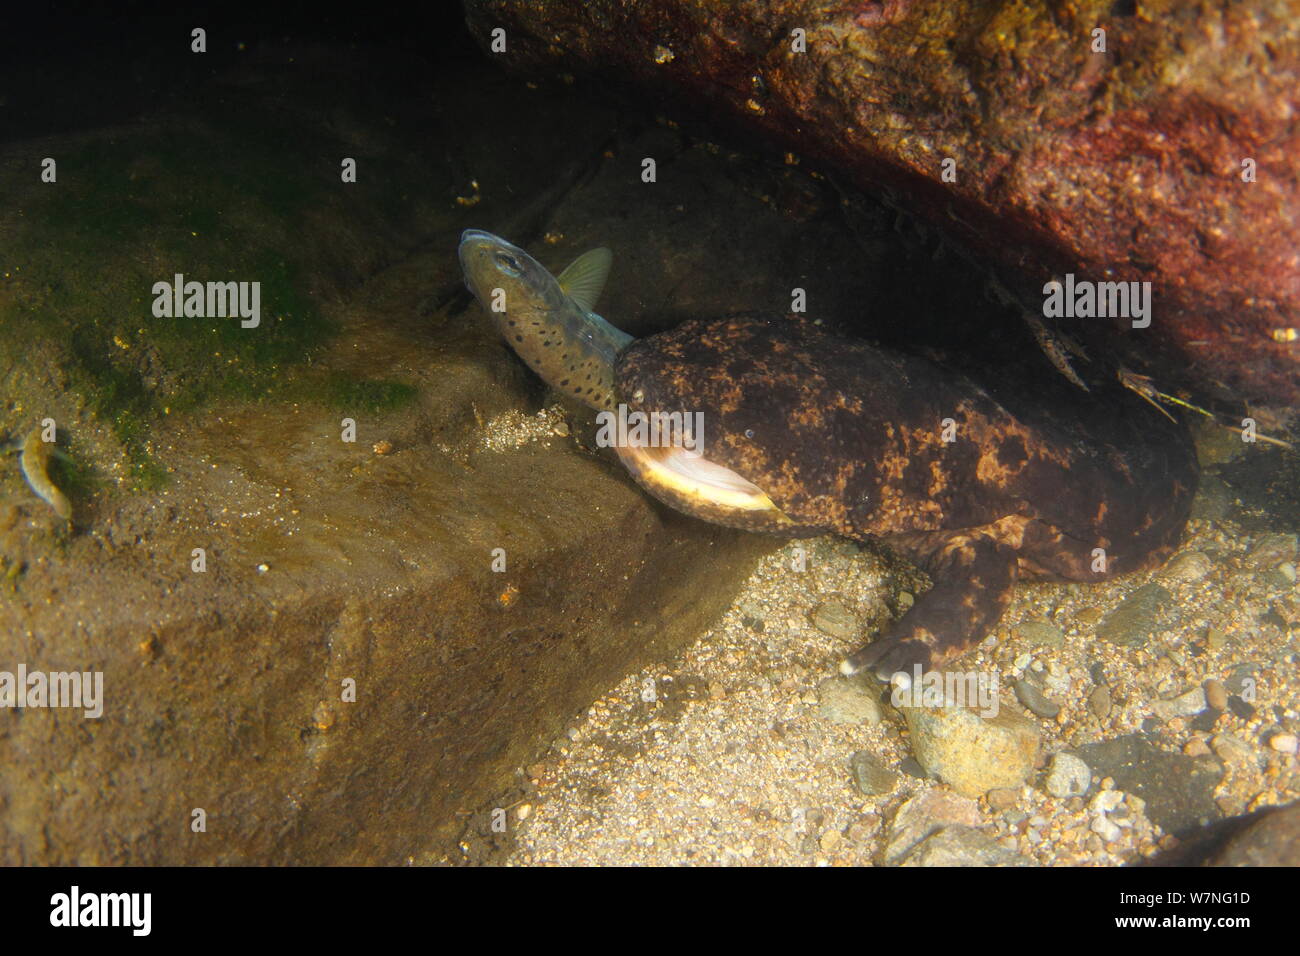 Japanese giant salamander (Andrias japonicus) with Masu salmon (Oncorhynchus) prey in its mouth, Japan, August Stock Photo